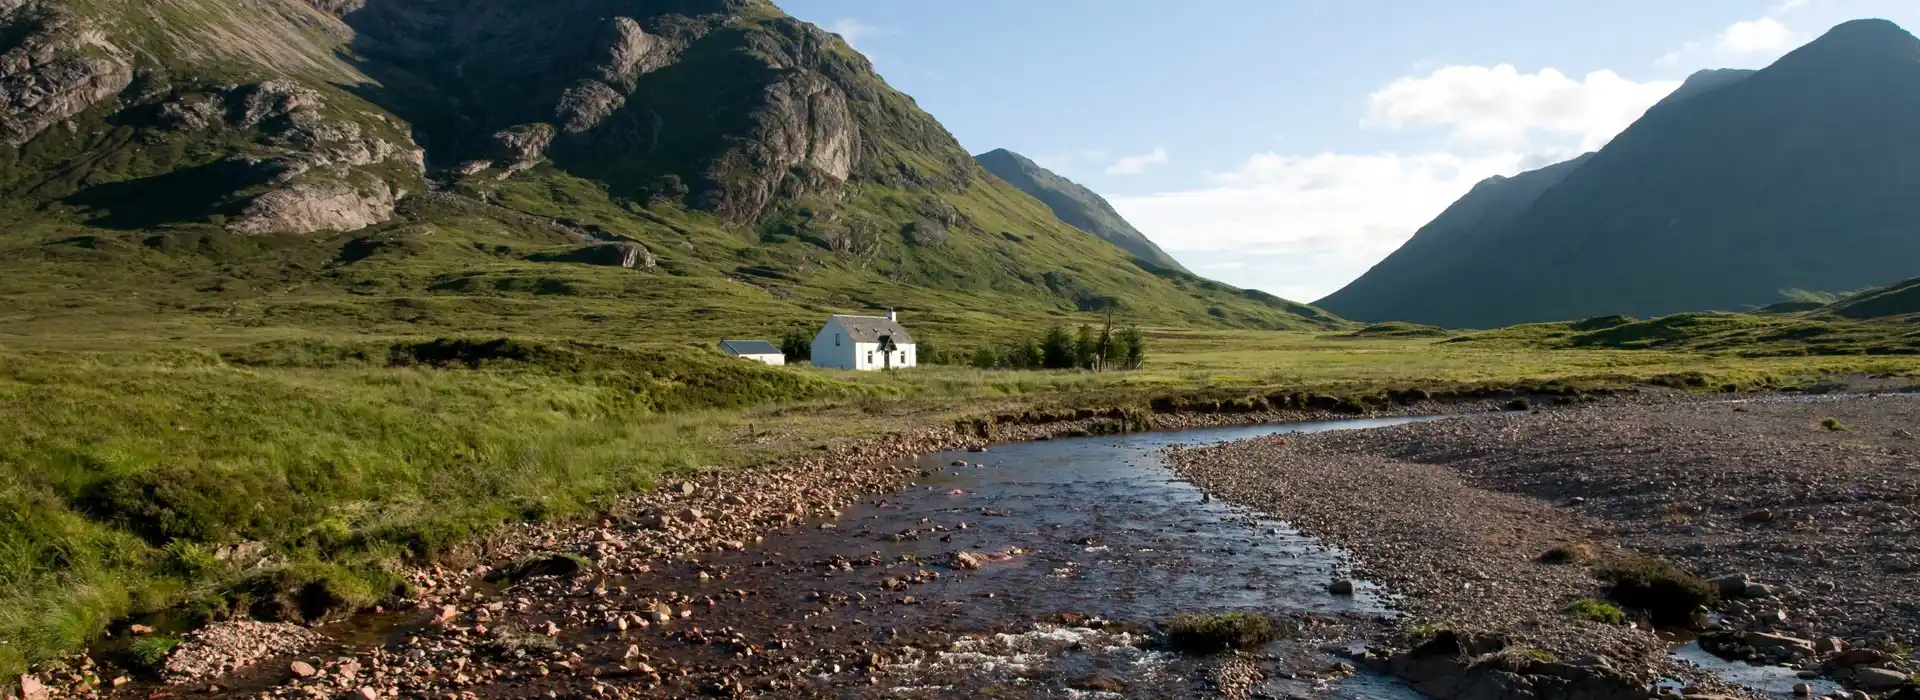 Campsites near the West Highland Way